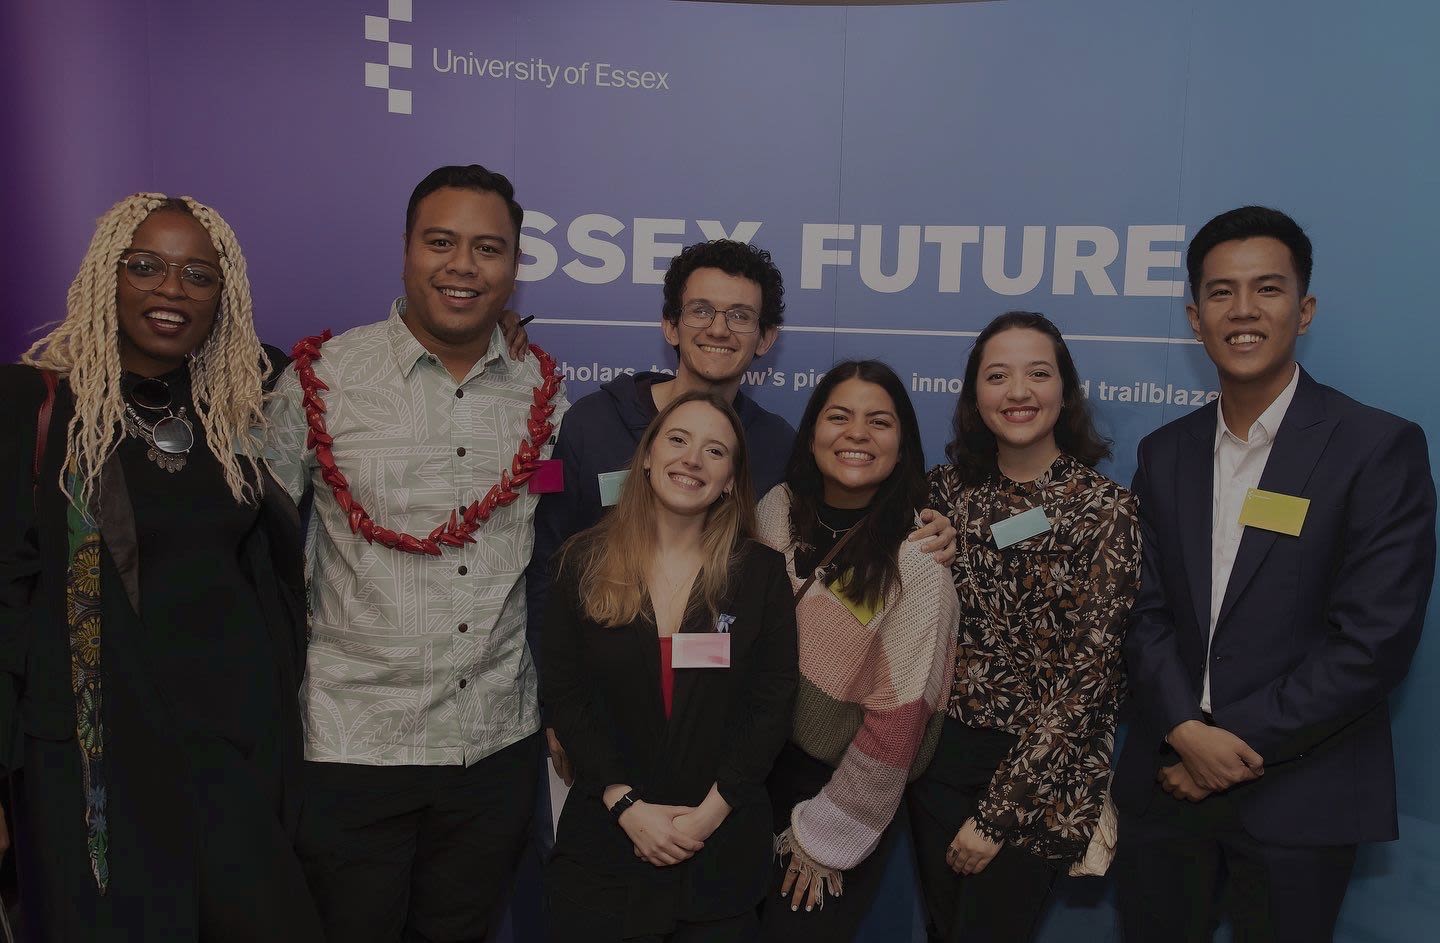  A group of our International Students at our Essex Futures event